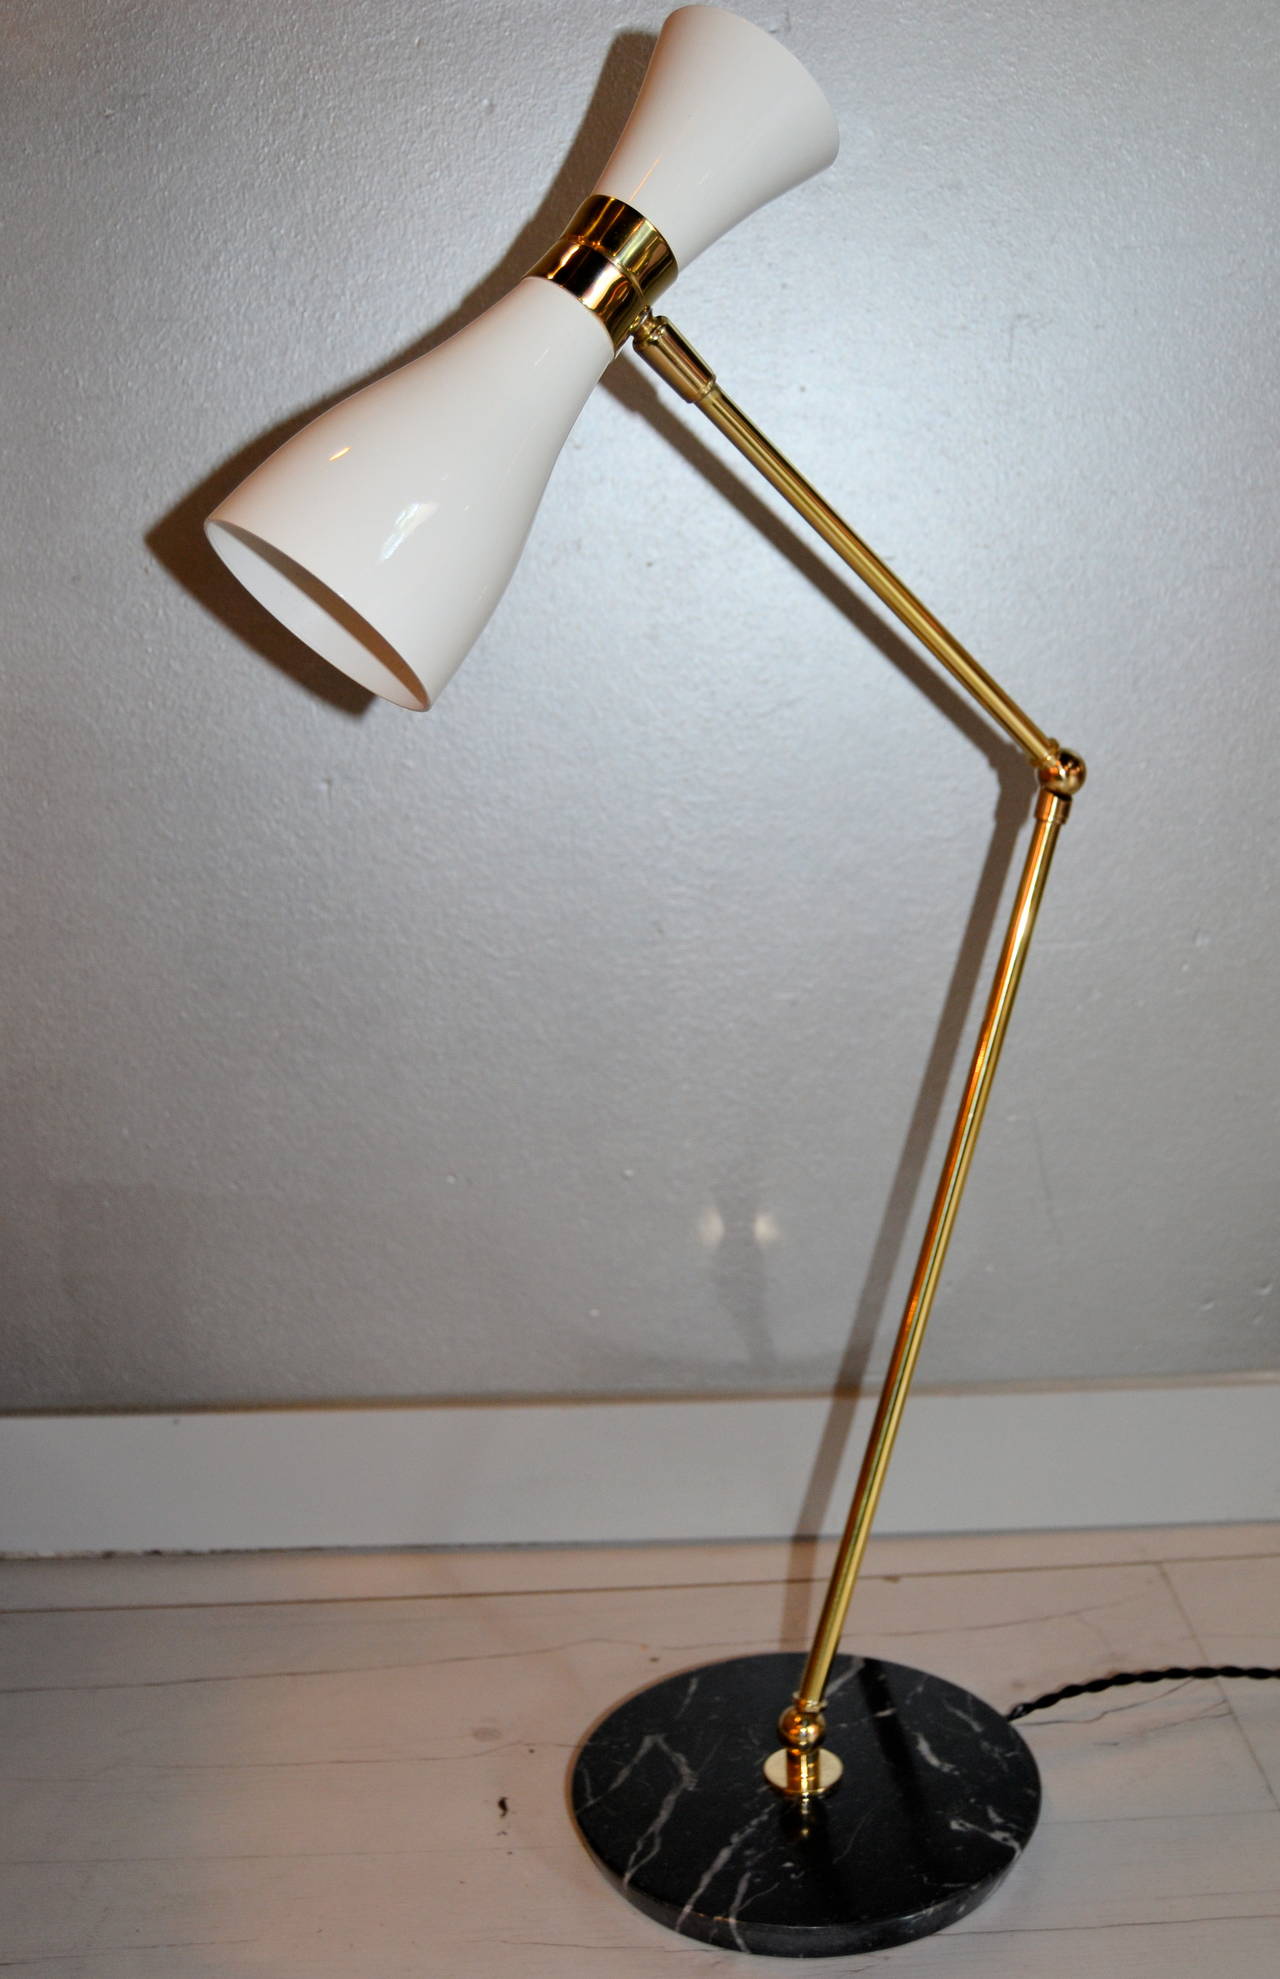 1960s Italian desk lamp with black with white veined marble round base. Lamp is compose by three swivels to be adjusted in height and rotating metal shade painted on white.
Lamp has been entirely restored and rewired for European used.